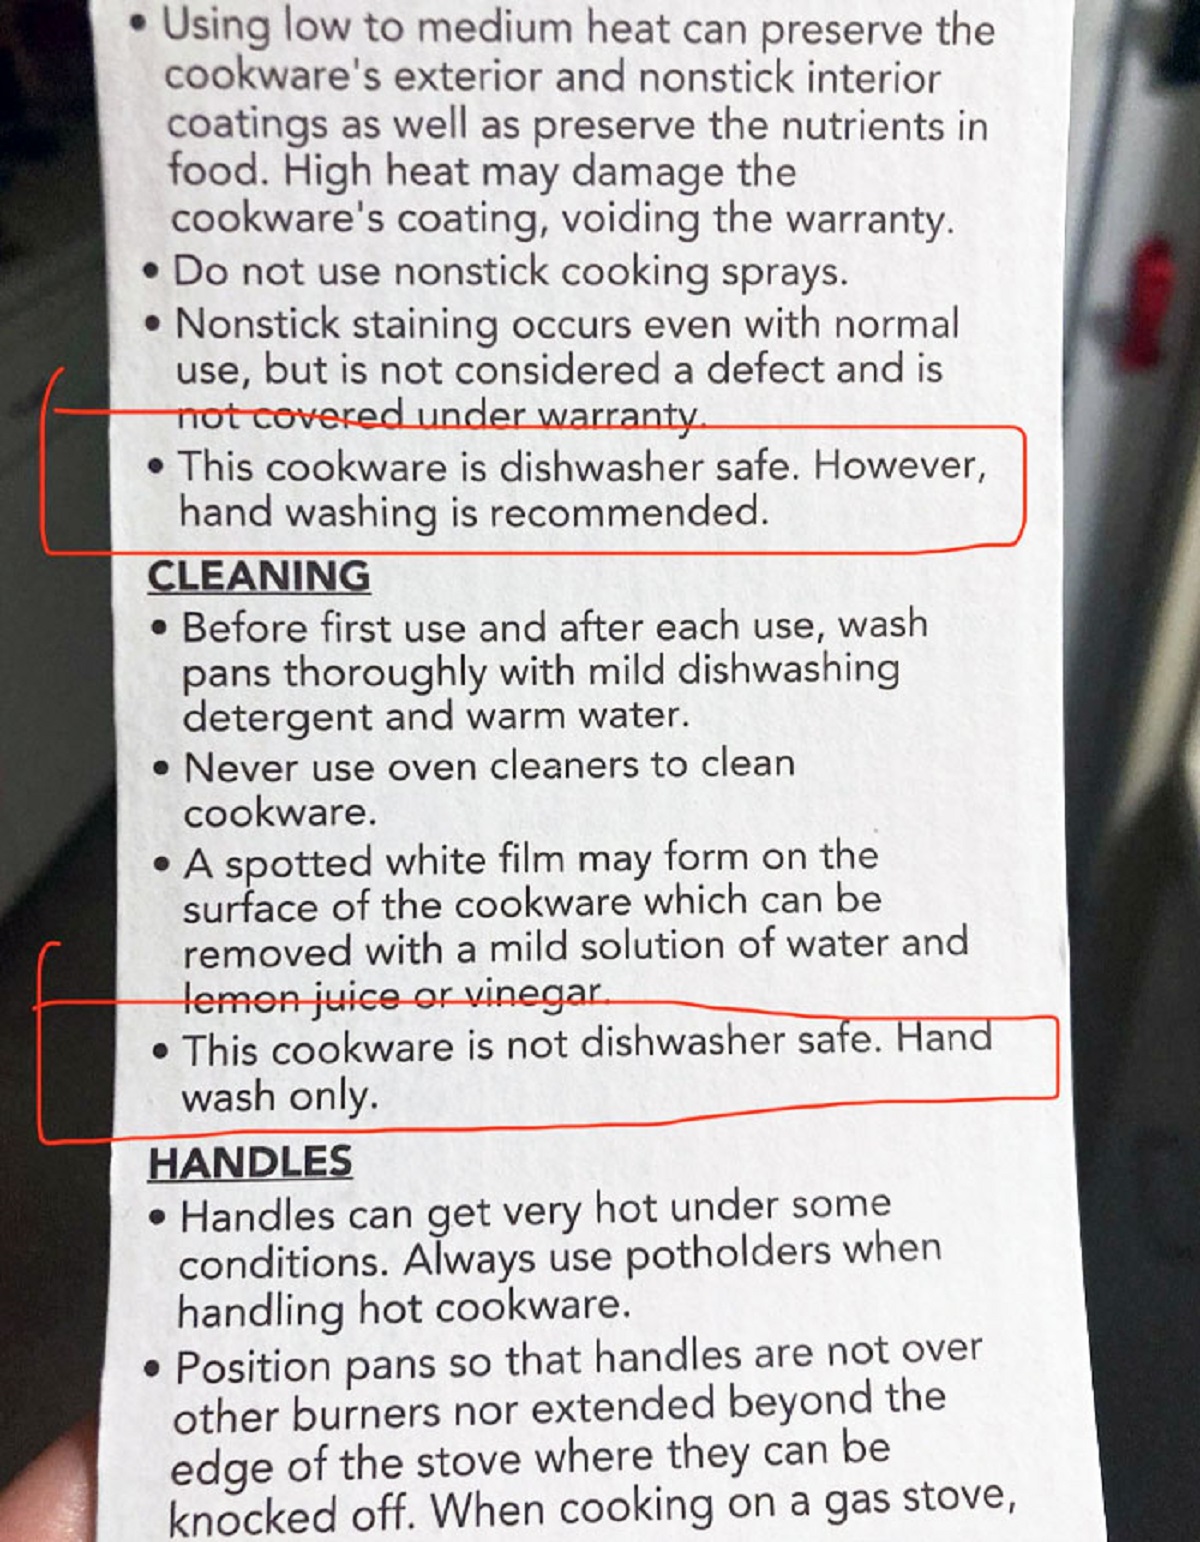 My New Pan Is Dishwasher-Safe And Unsafe